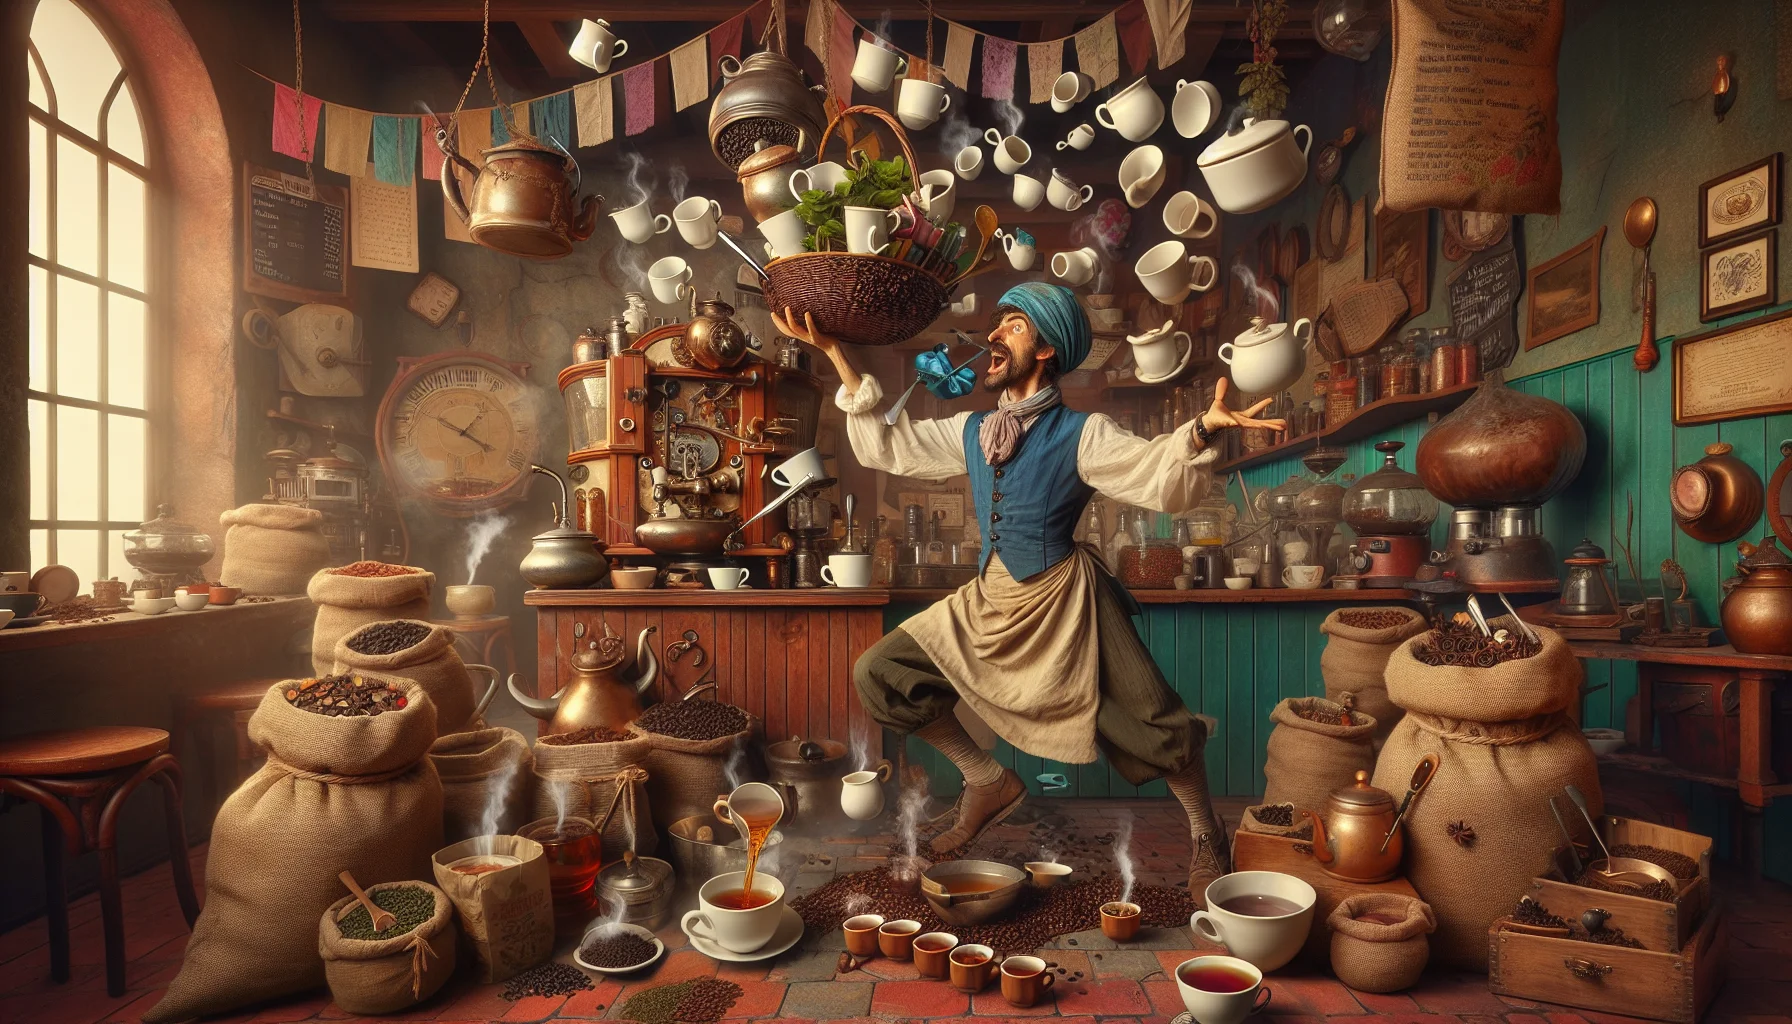 Create a humorous scene which showcases an individual named 'Aris Moreno', who is passionate about making tea and coffee. This person could be depicted in a whimsical steampunk-inspired attire, frantically juggling a variety of tea and coffee brewing tools, bags of tea leaves, and coffee beans. The traditional coffee and tea brewing machines around this character are unique and captivating, emanating tempting aromas. The background setting is a charming, bohemian café filled with steaming mugs, pots of tea, and coffee brewing gadgets. Imagine the laughter and delight this brings to the café's multicultural and multi-gender patrons.